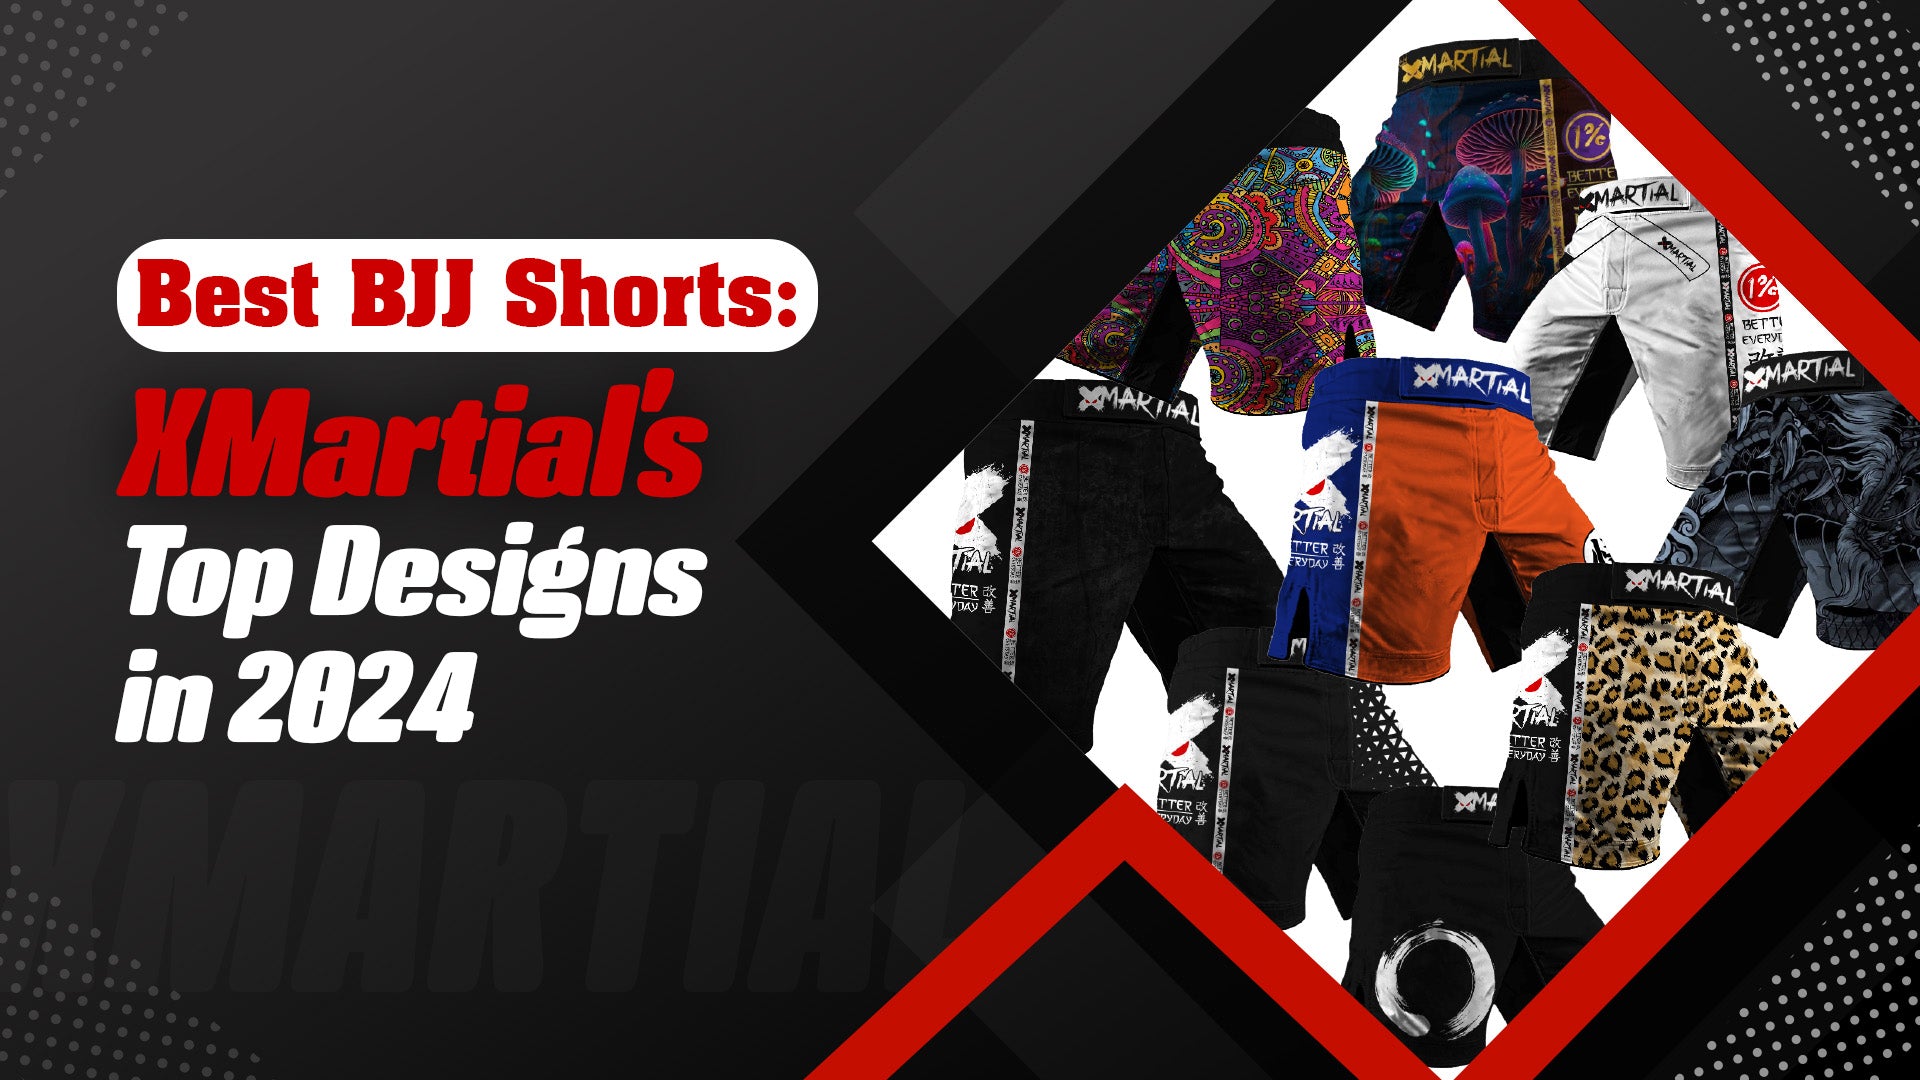 Best BJJ Shorts: XMartial's Top Designs in 2024